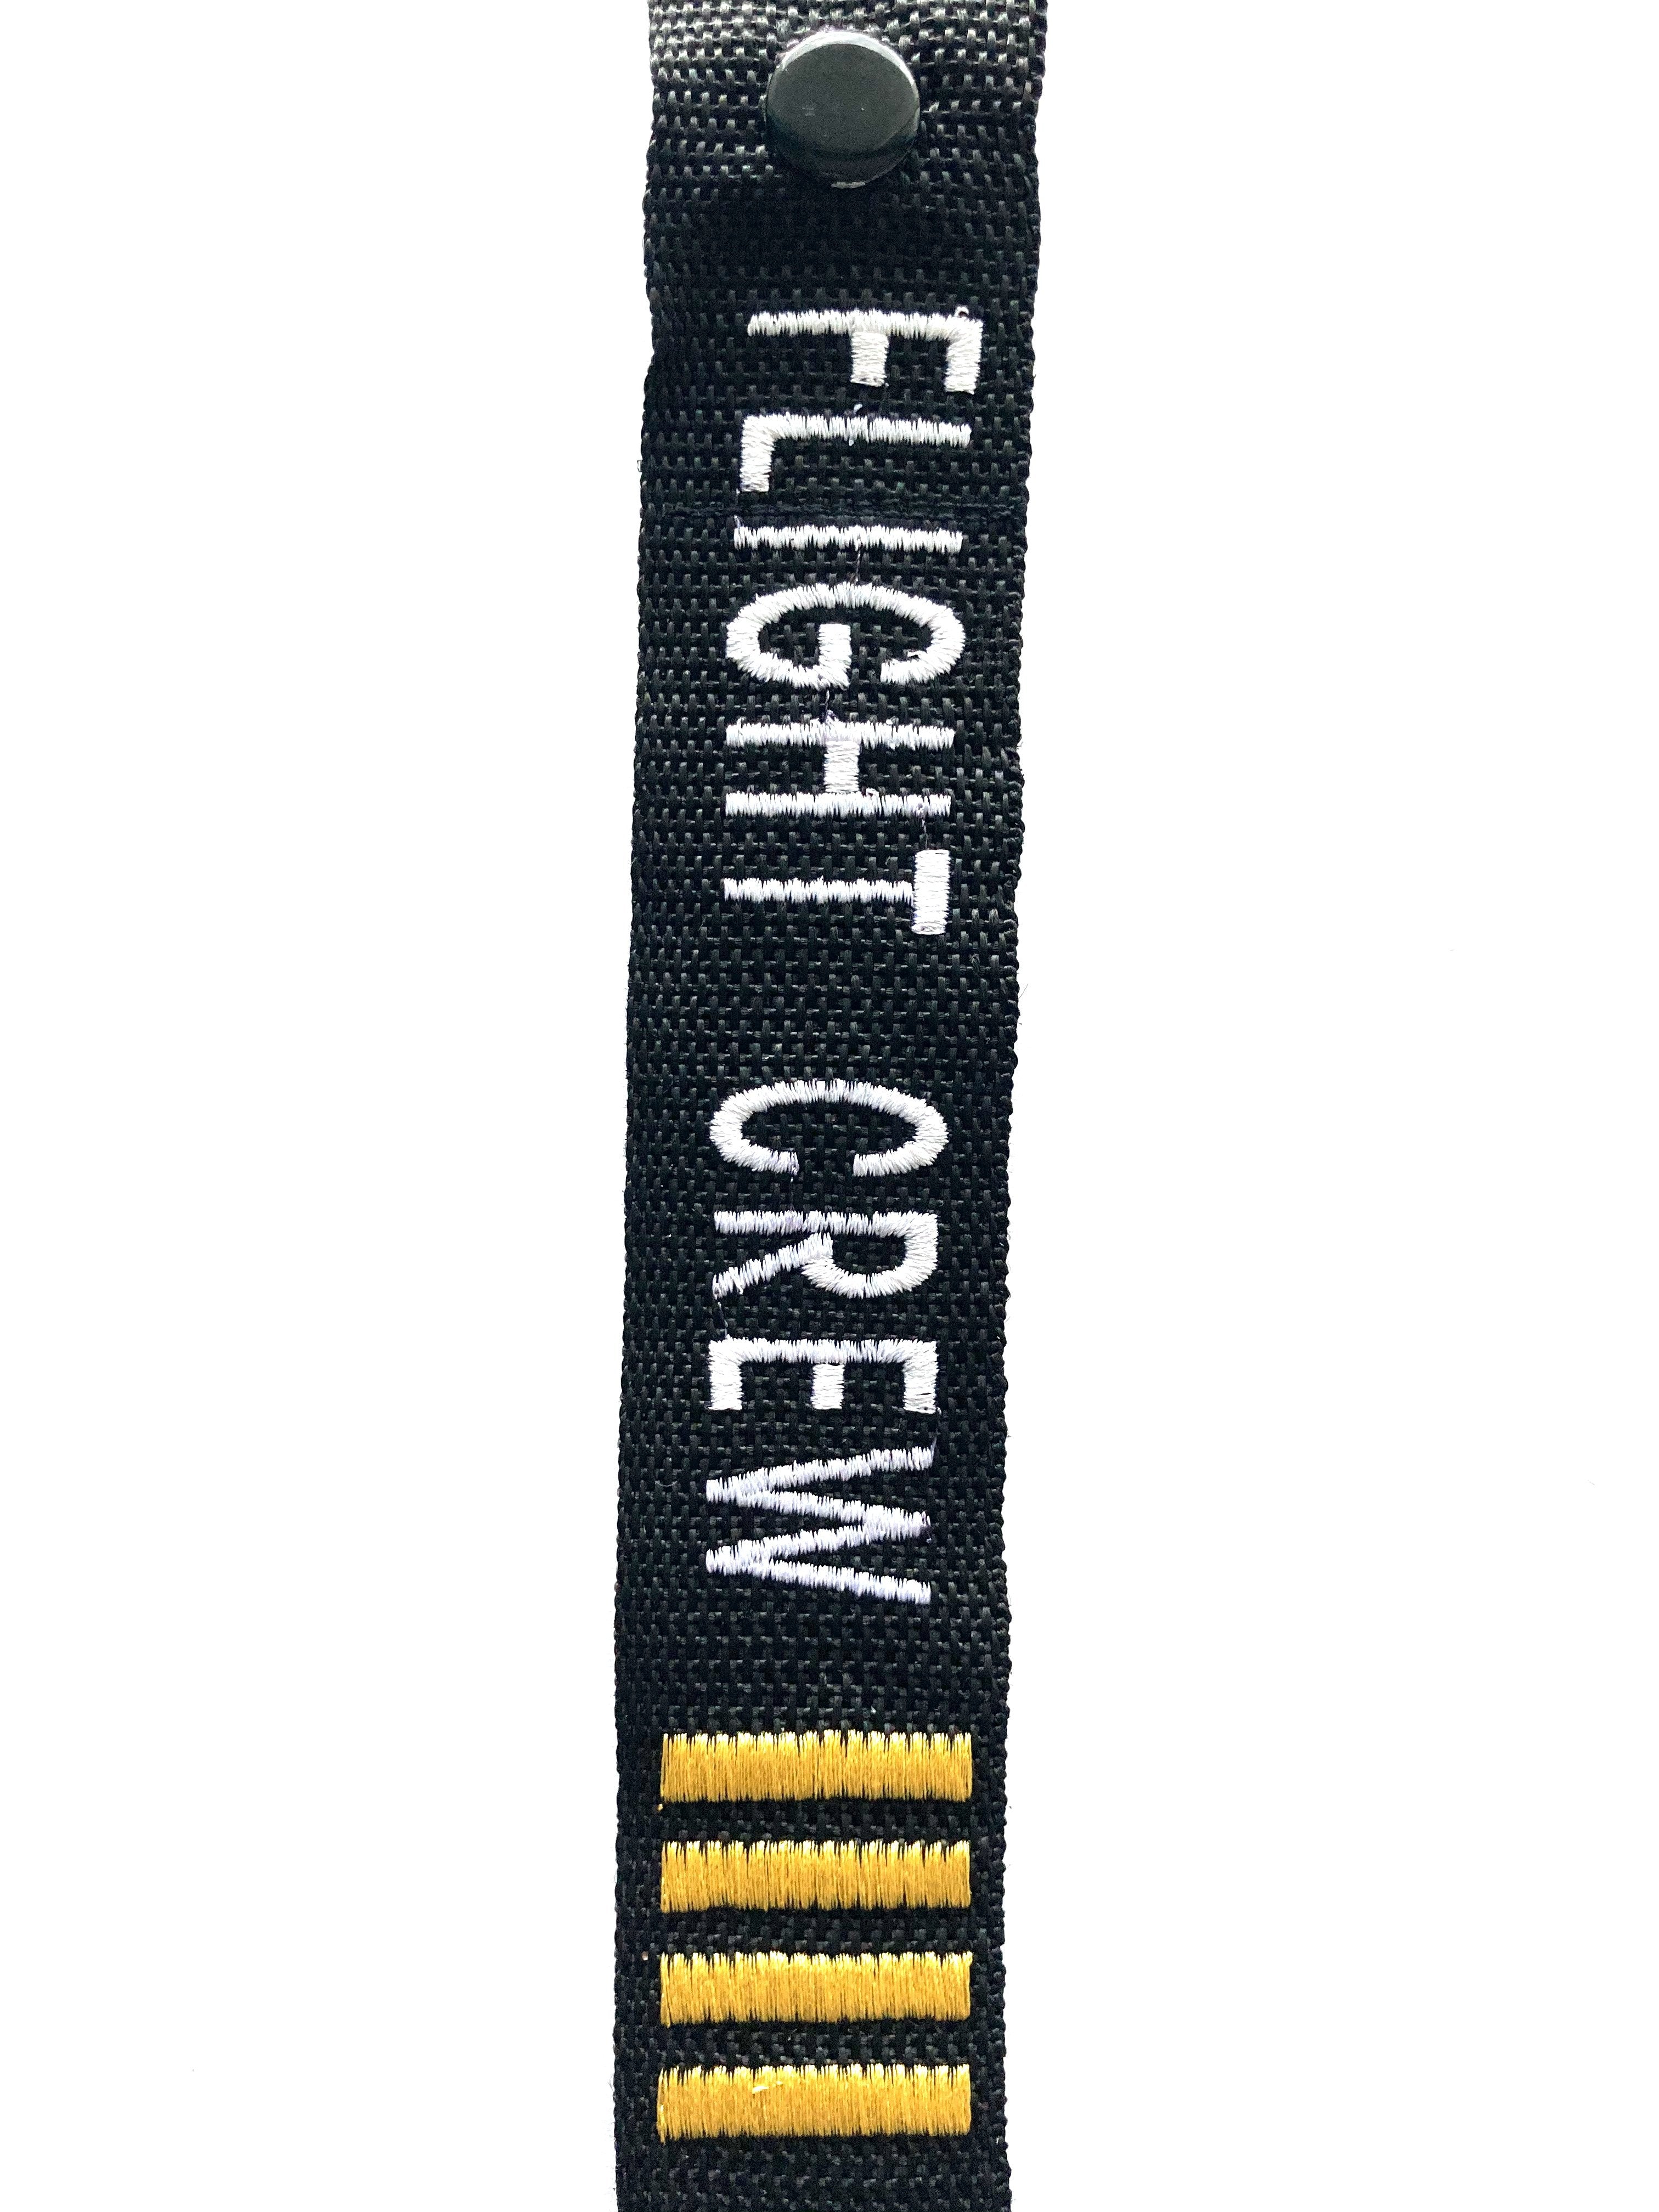 AIRLINE LINGO LUGGAGE TAGS Flight Crew